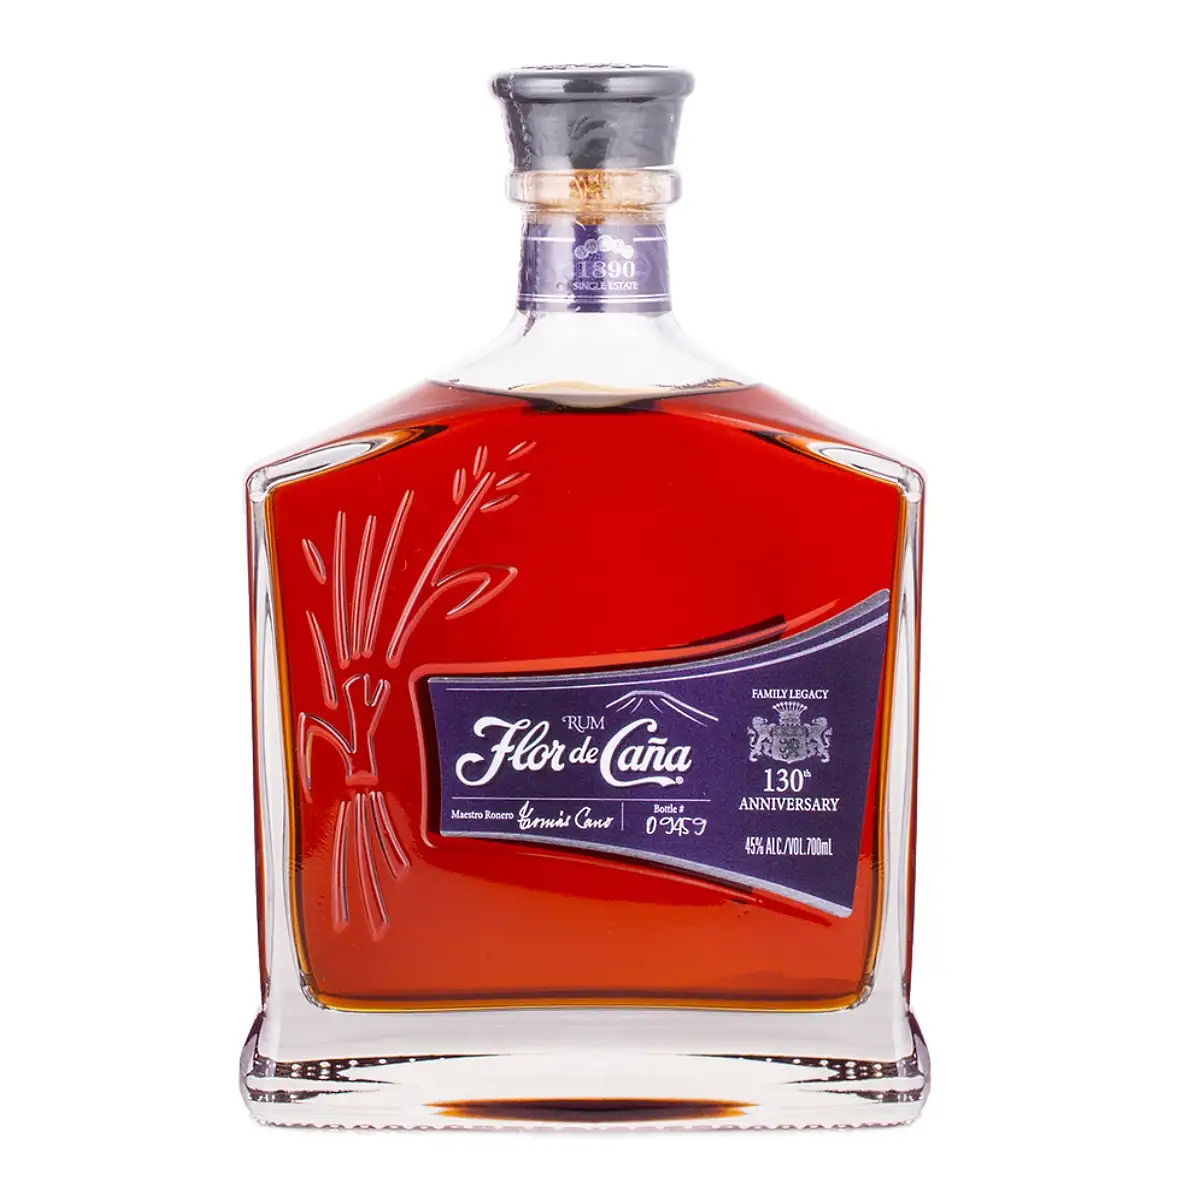 Image of the front of the bottle of the rum Flor de Caña 130th Anniversary